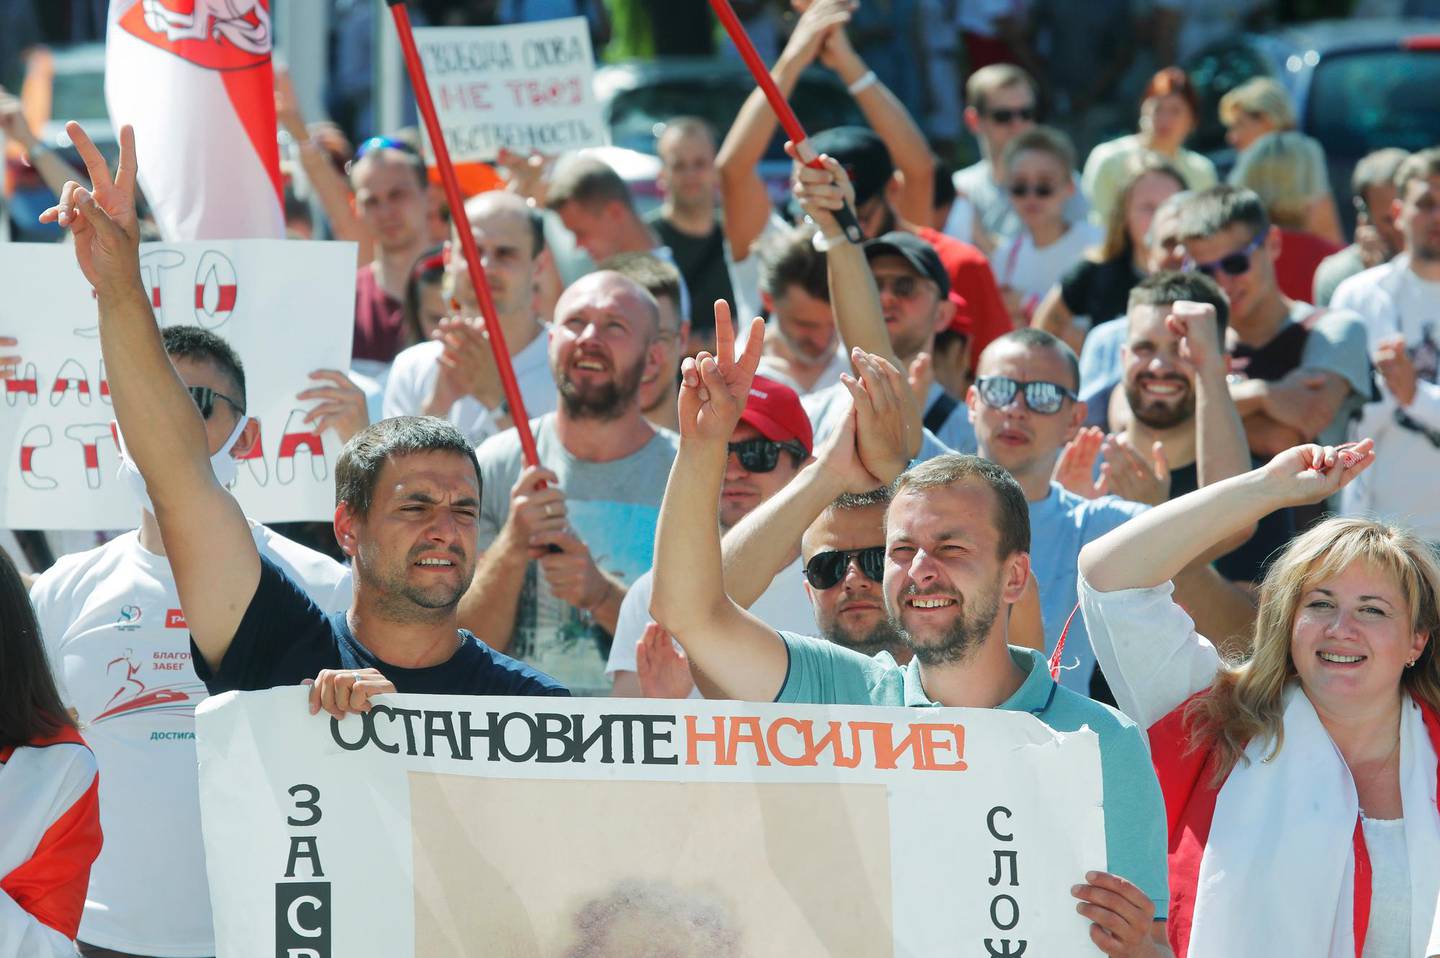 People hold a banner reading "Stop violence!" during a rally near the Belarus Television headquarters in Minsk, Belarus, Monday, Aug. 17, 2020.  Thousands of factory workers are taking to the streets of Minsk demanding the resignation of authoritarian President Alexander Lukashenko, in the ninth straight day of protests against an election that extended his long rule over the country. (AP Photo/Dmitri Lovetsky)